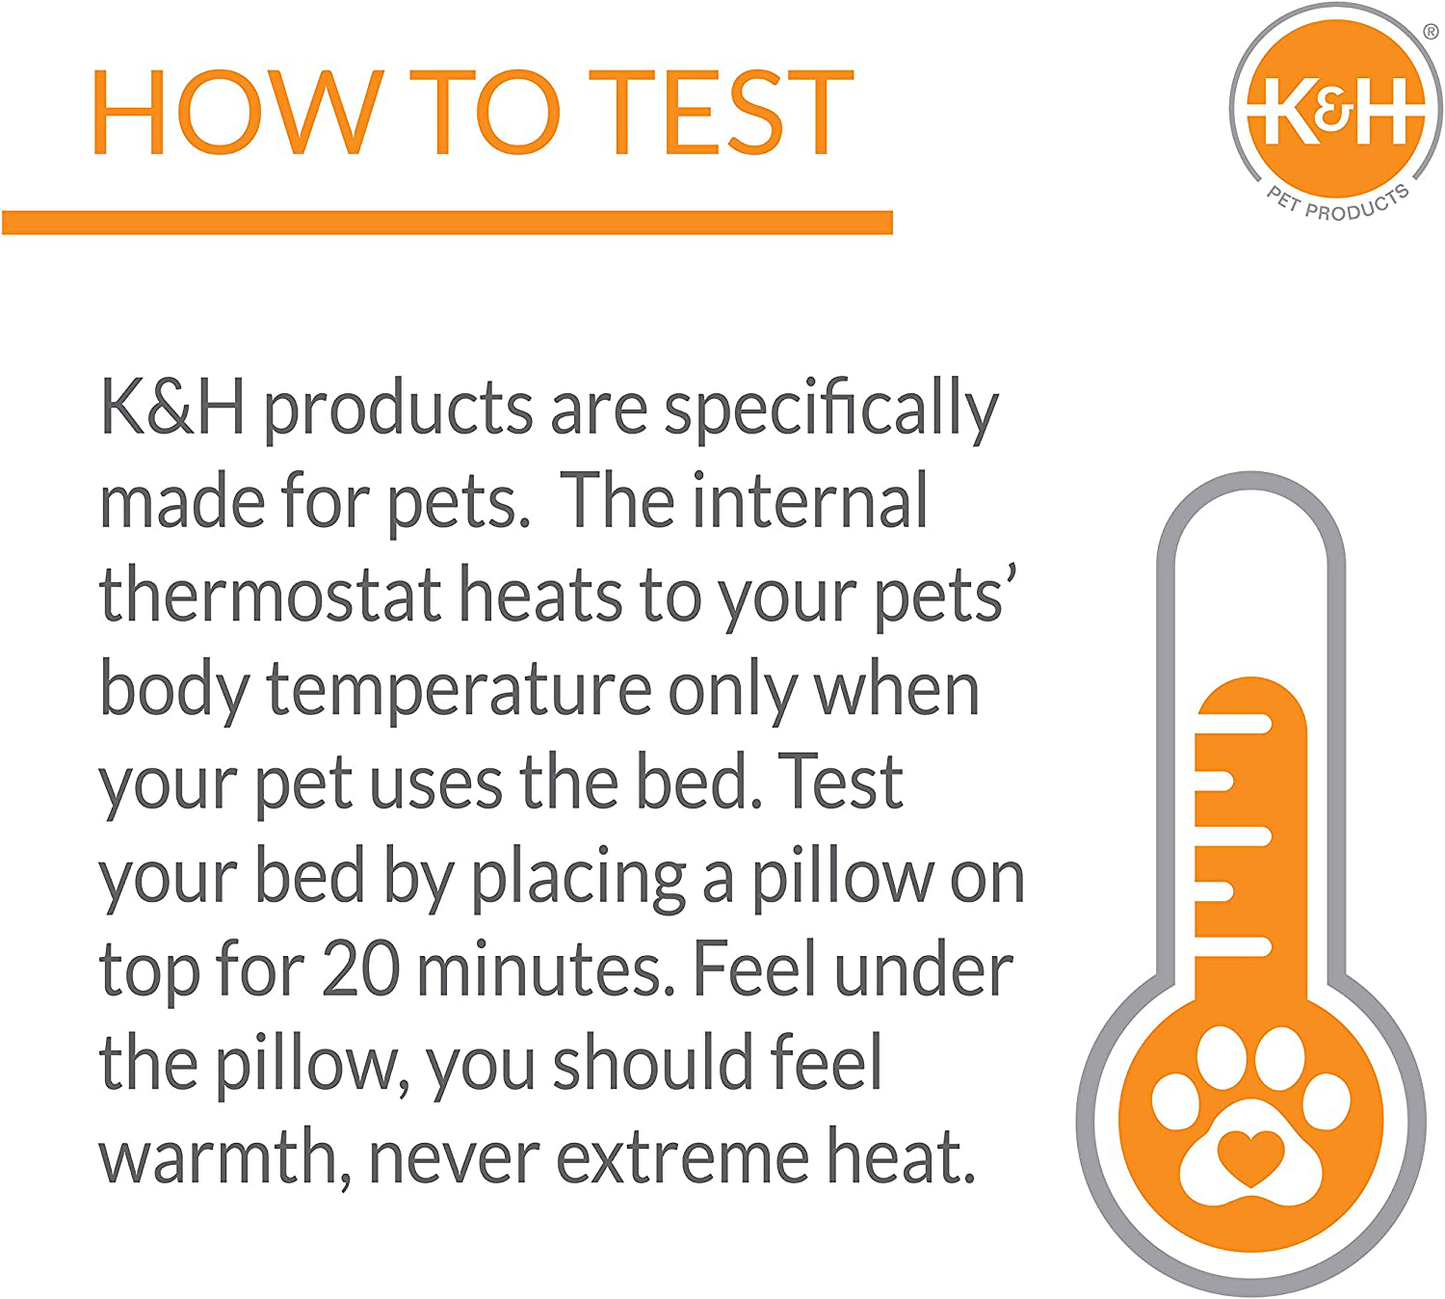 K&H PET PRODUCTS Heated Extreme Weather Kitty Pad Petite Outdoor Heated Animal Pad Animals & Pet Supplies > Pet Supplies > Cat Supplies > Cat Beds K&H PET PRODUCTS   